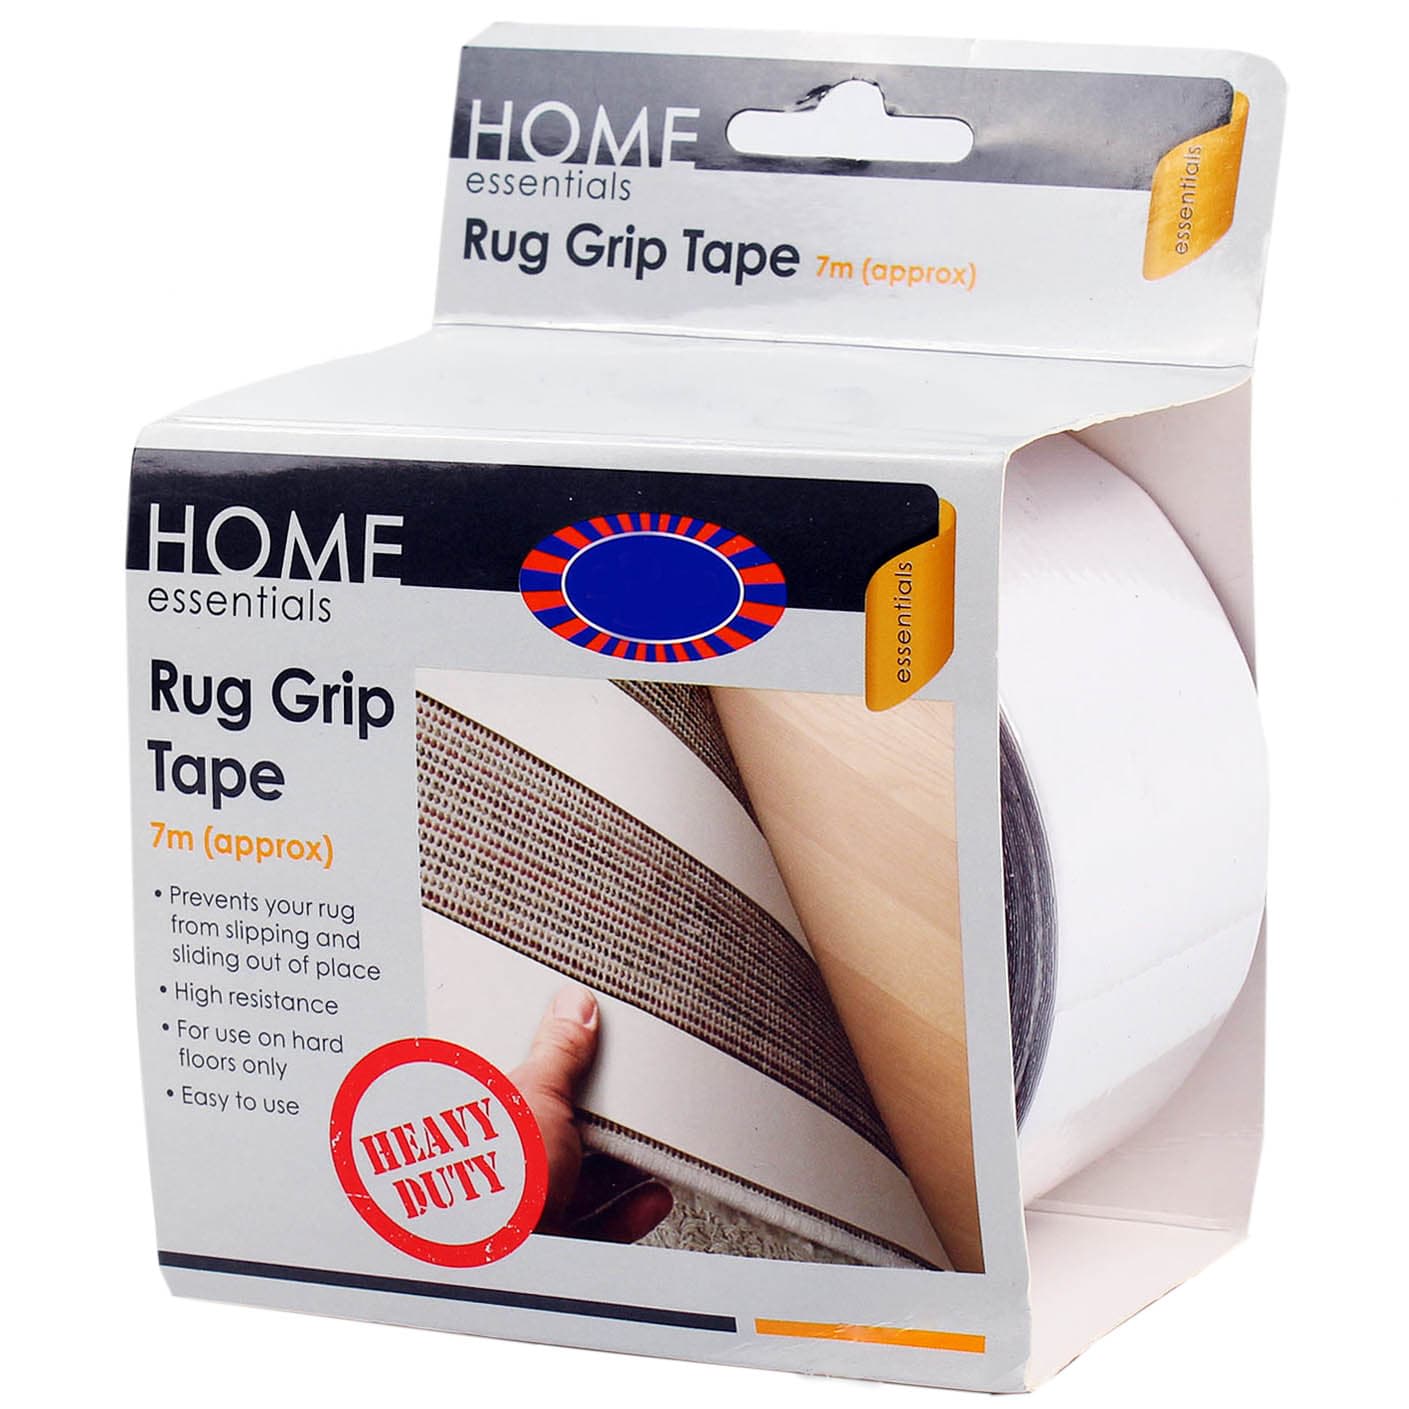 https://www.bmstores.co.uk/images/hpcProductImage/imgSource/323553-rug-grip-tape-7m.jpg